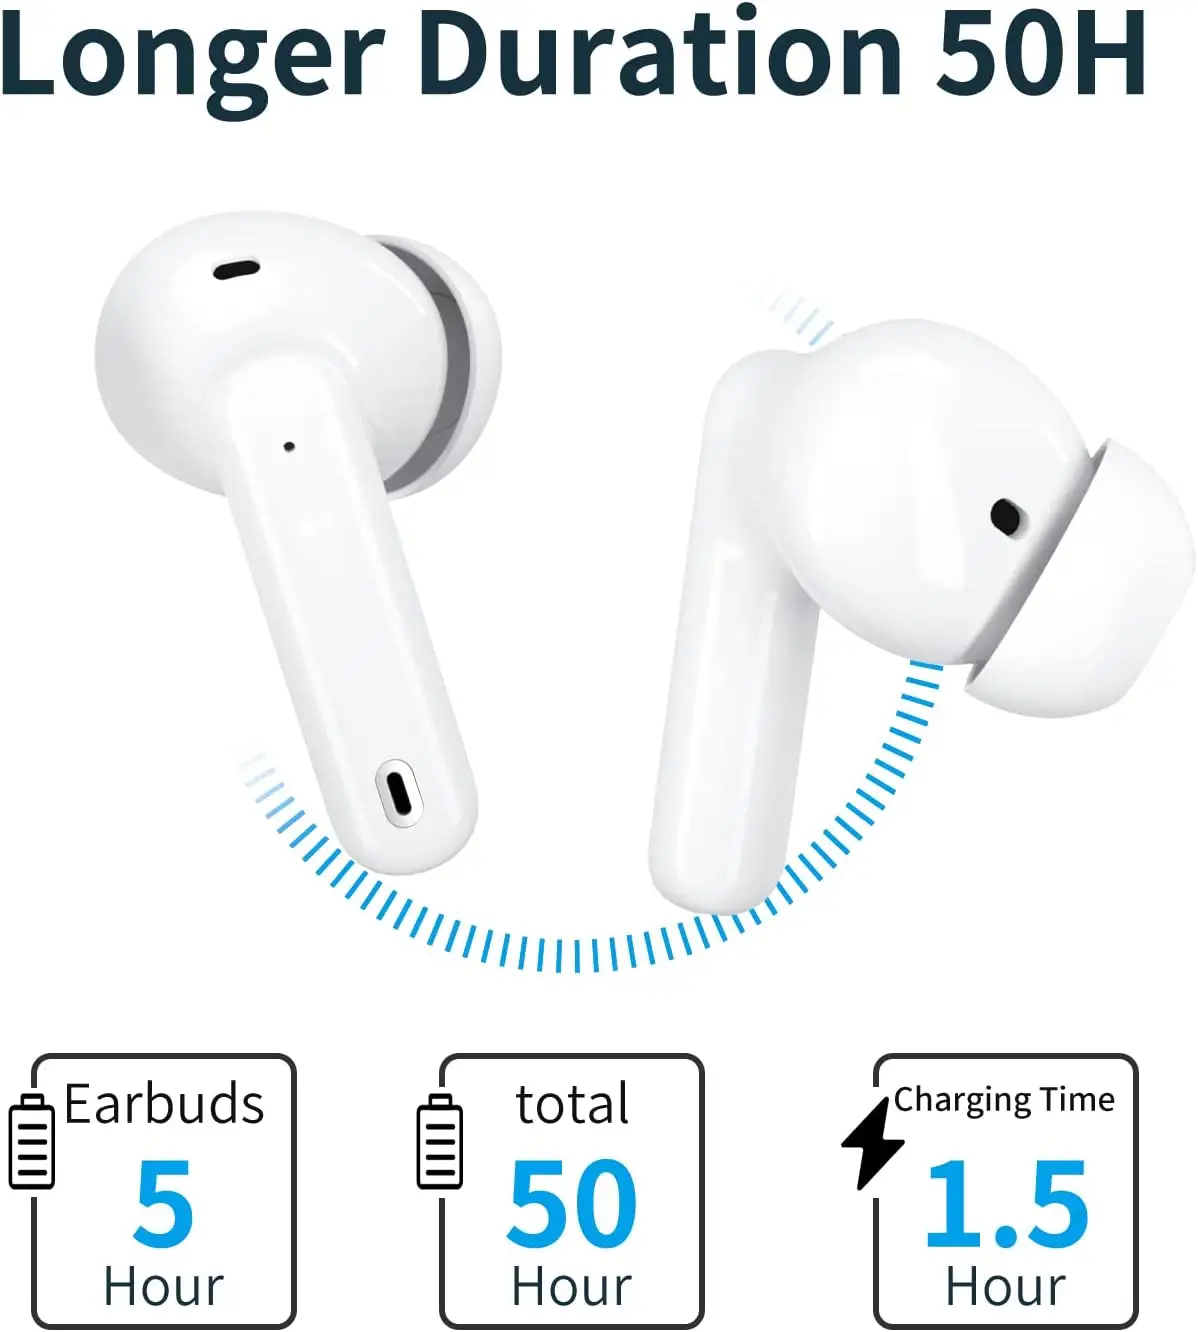 True Wireless Stereo Earbuds Smart Touch Control In-Ear Wireless Bluetooth5.3 Auriculares para deportes al aire libre